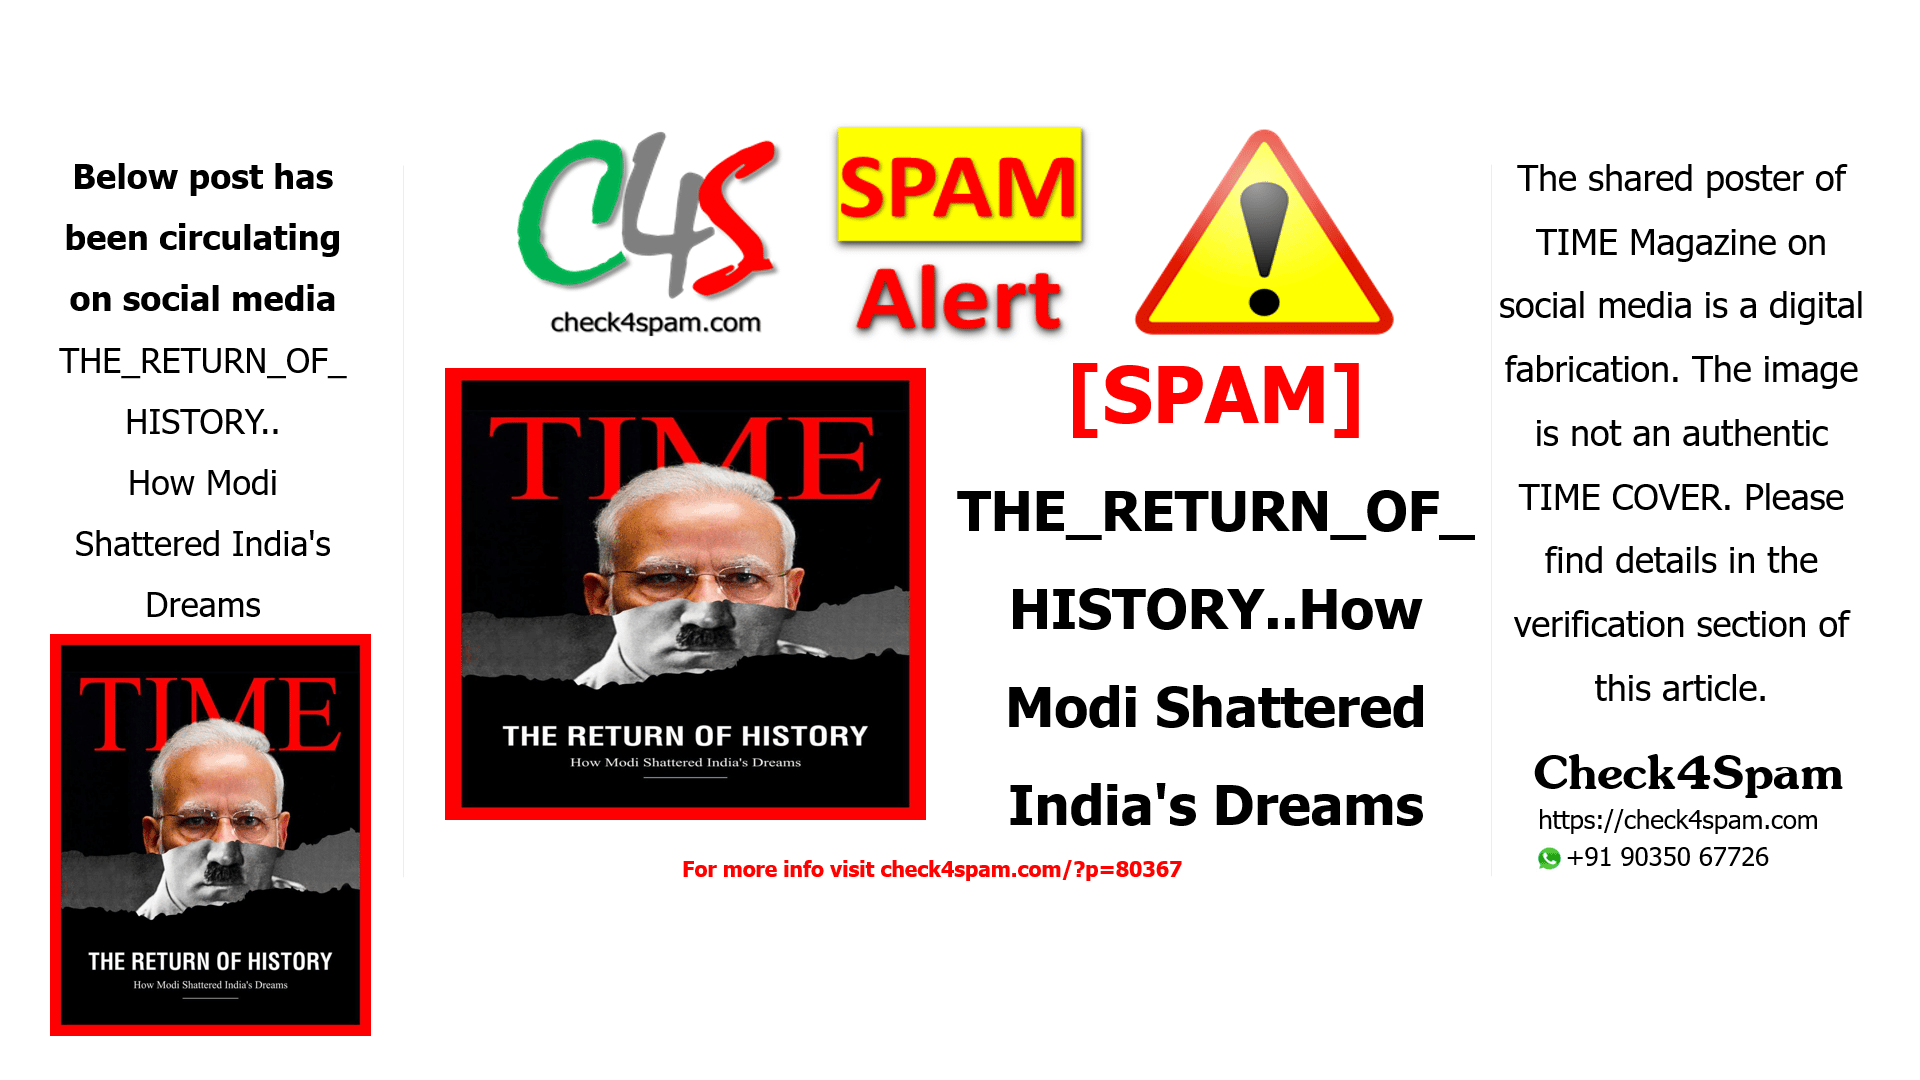 THE_RETURN_OF_HISTORY..How Modi Shattered India's Dreams